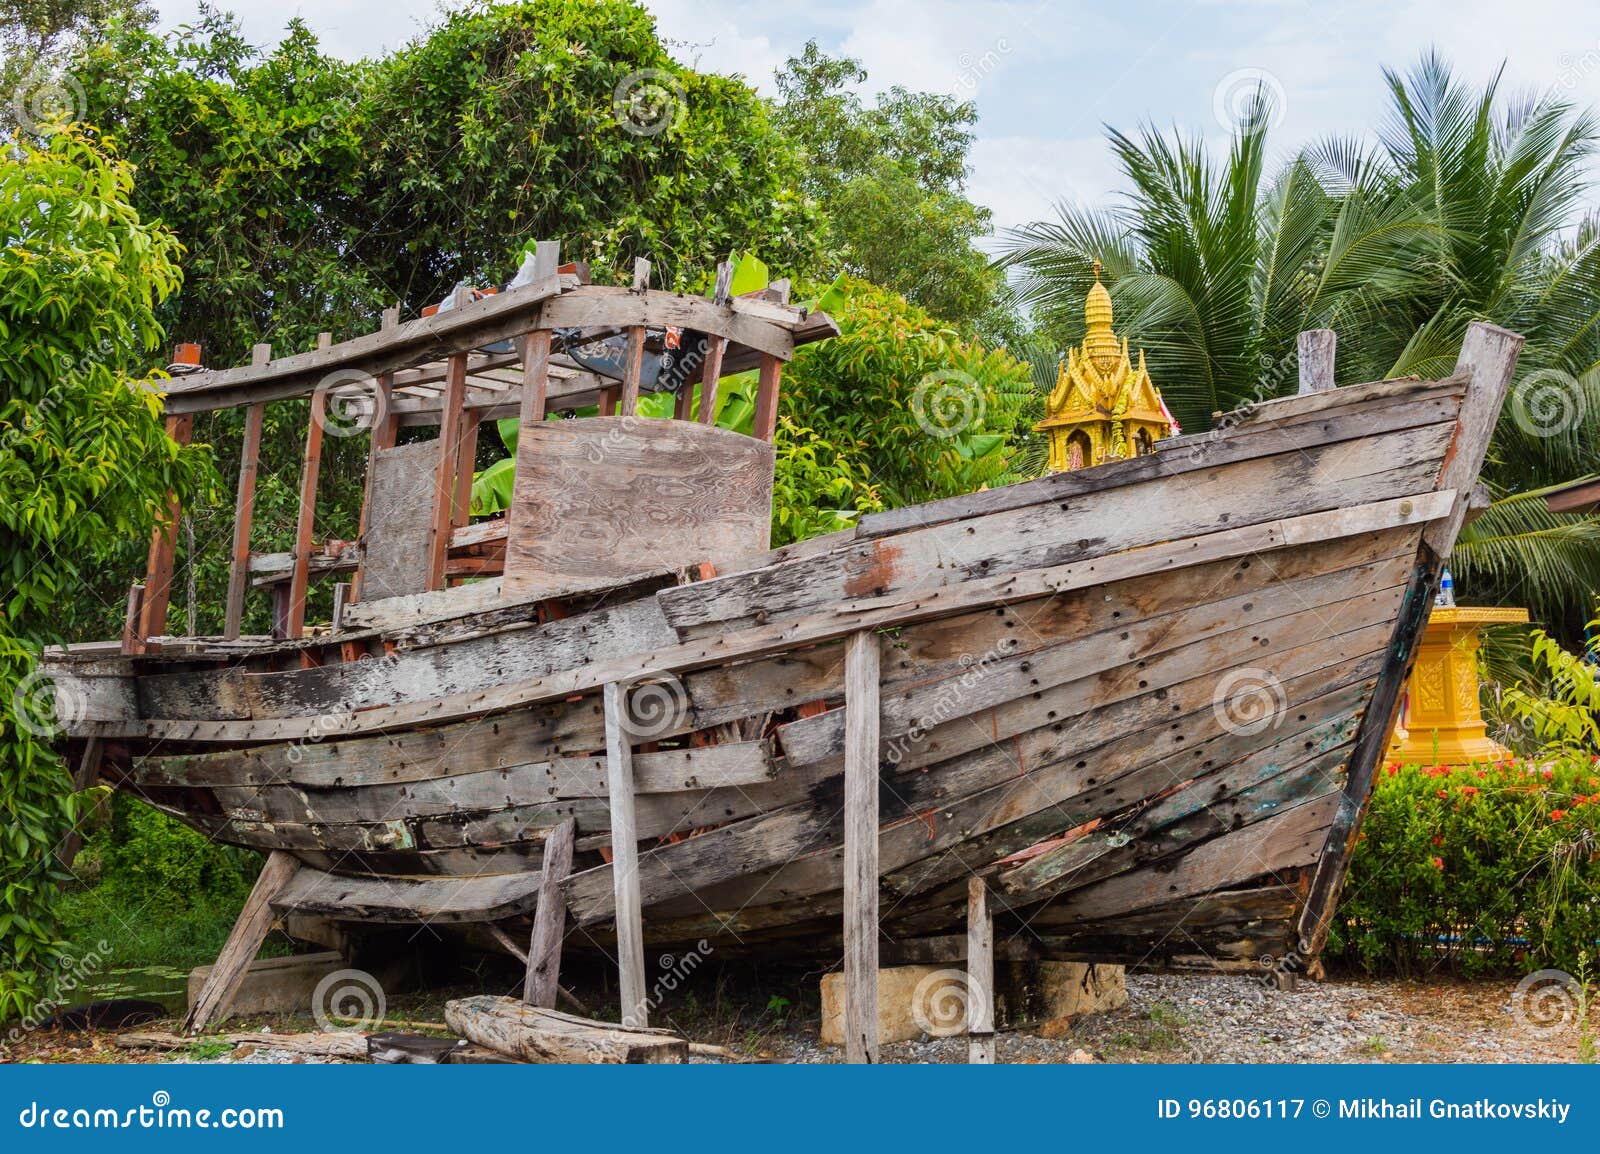 An Old Wooden Fishing Boat in Garden As Decoration Item Stock